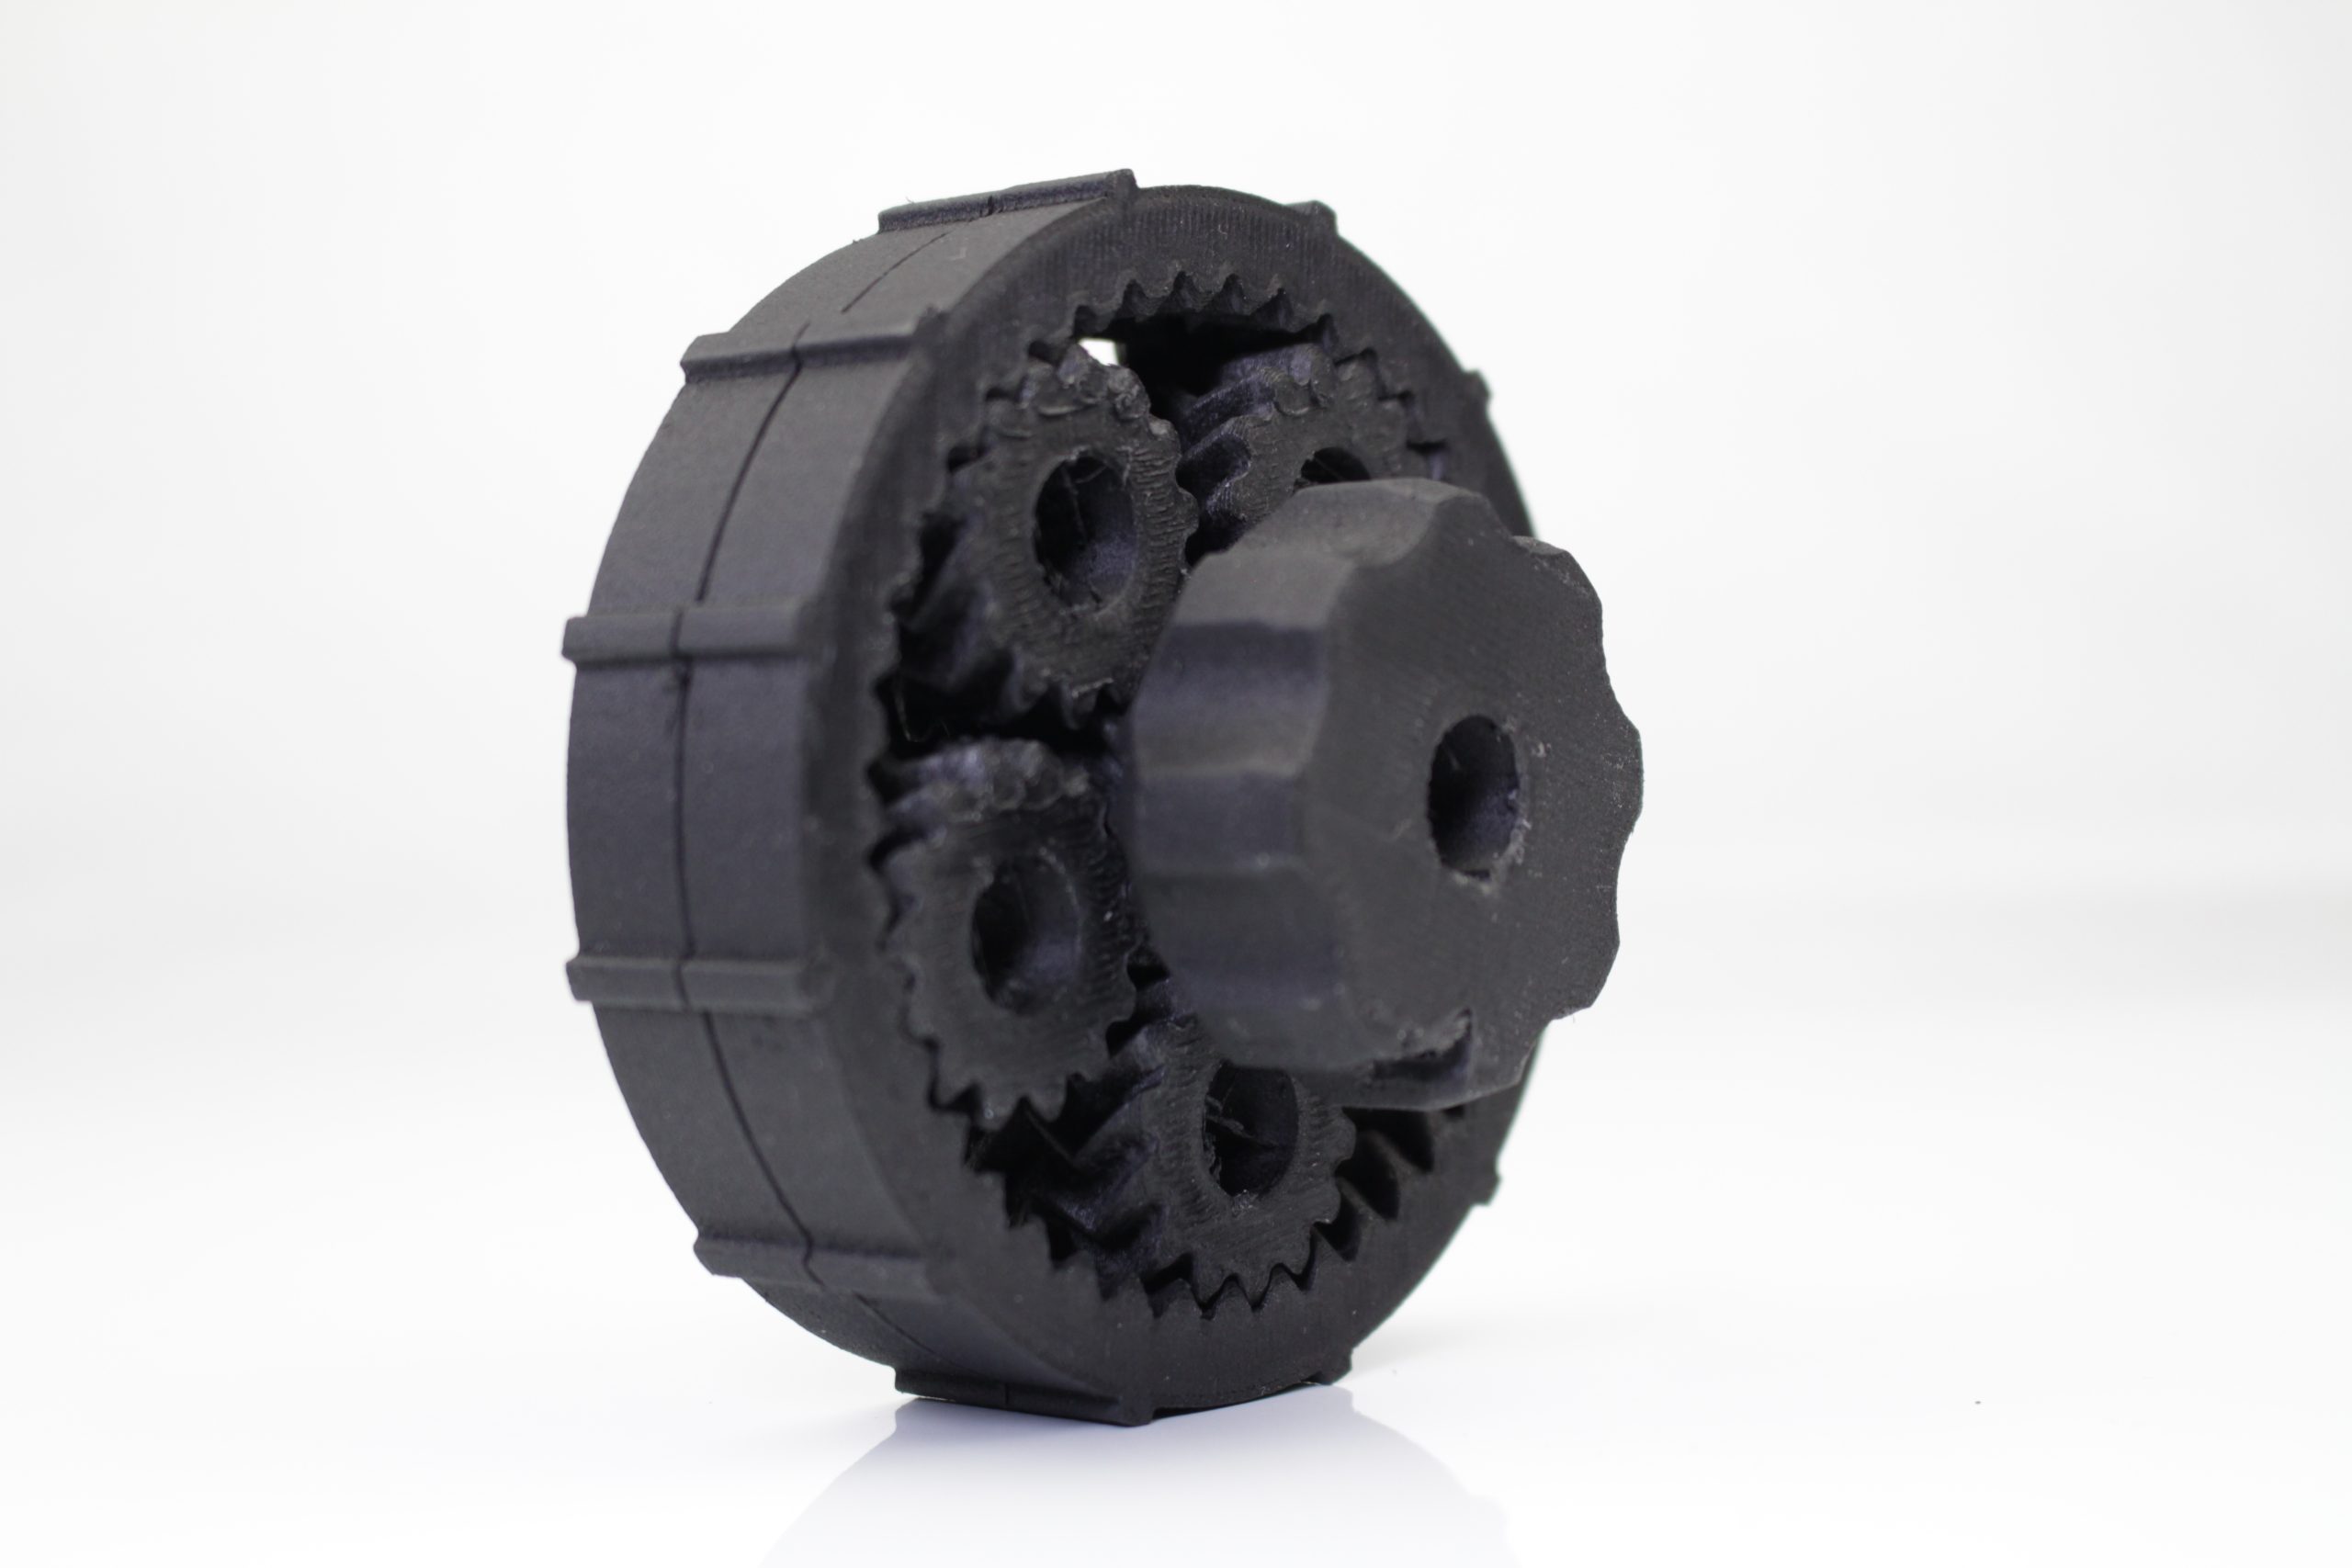 Planetary gear system. Photos by 3D Printing Industry.